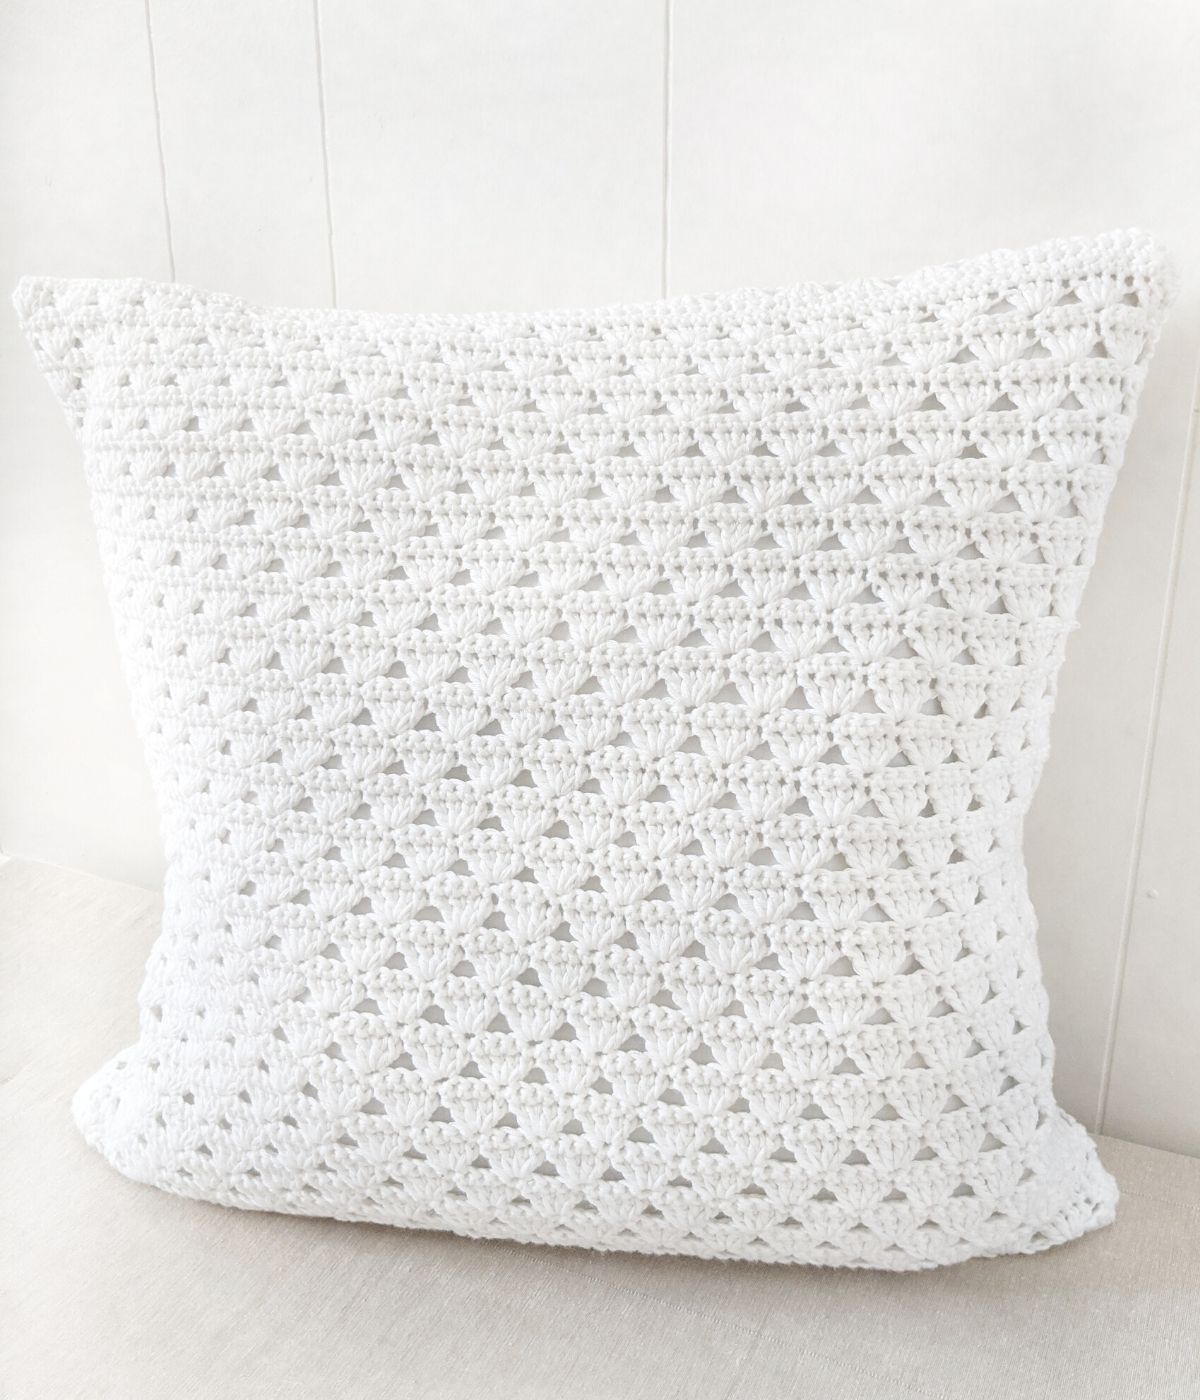 A modern crochet pillow cover with a white background